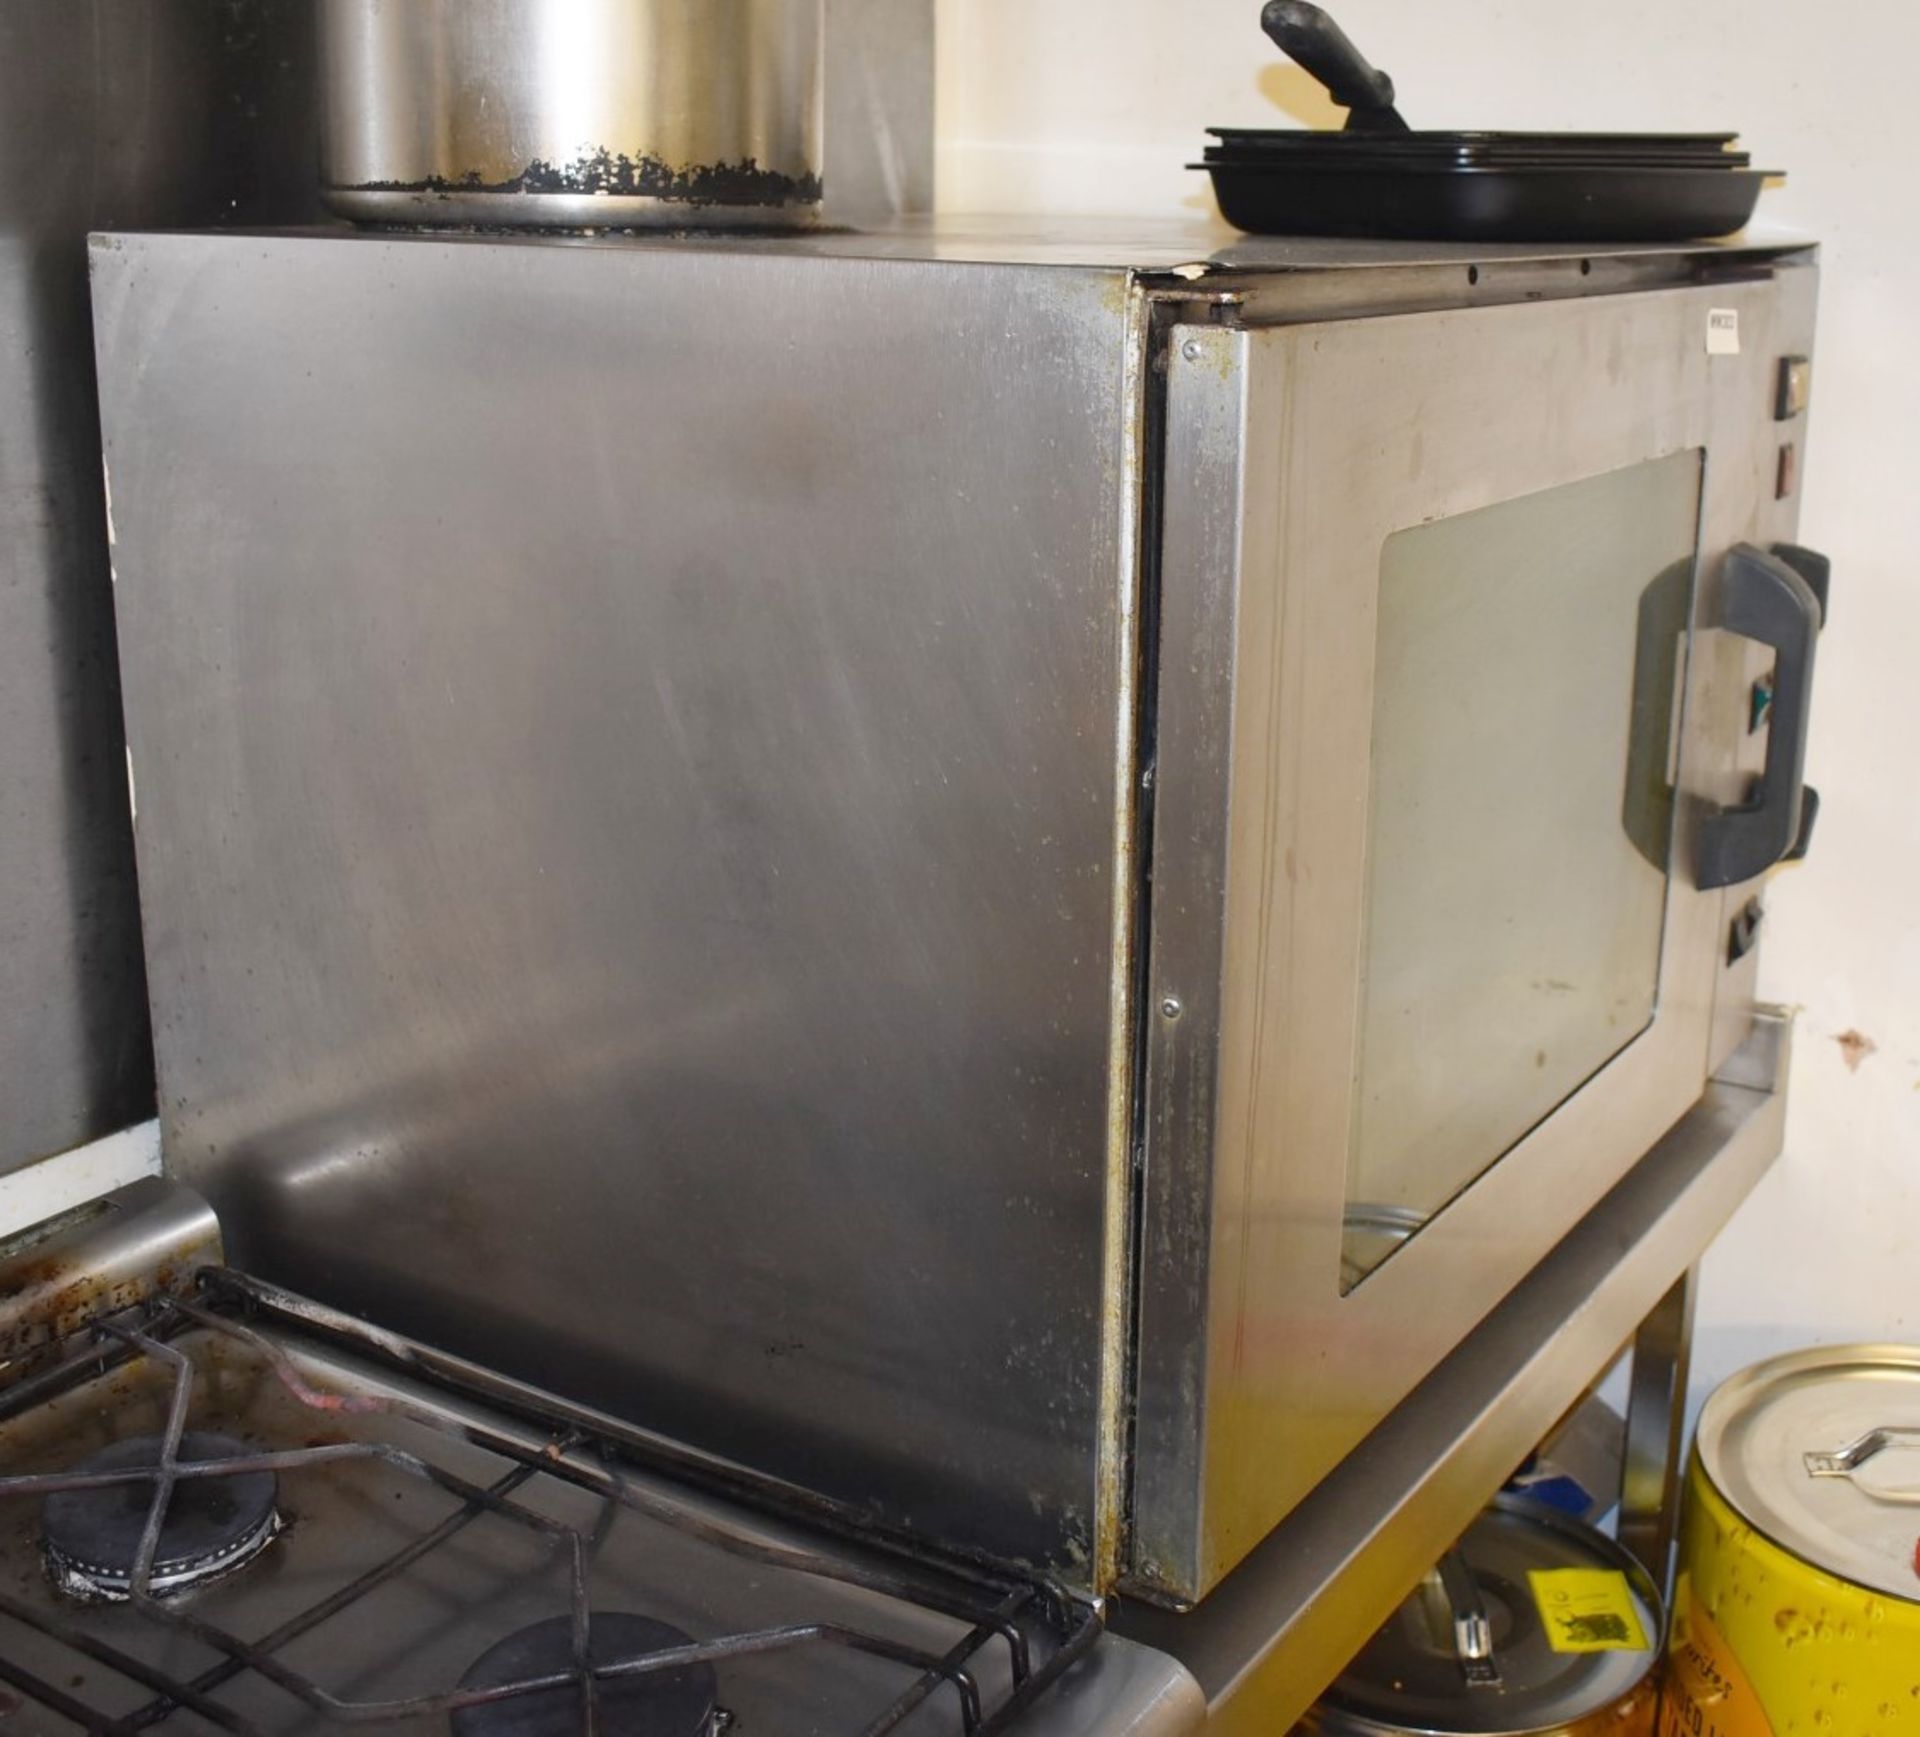 1 x Stainless Steel Commercial Four Grid Gas Oven - H144 x W76 x D62 cms - Ref WW303 - CL520 - - Image 3 of 4